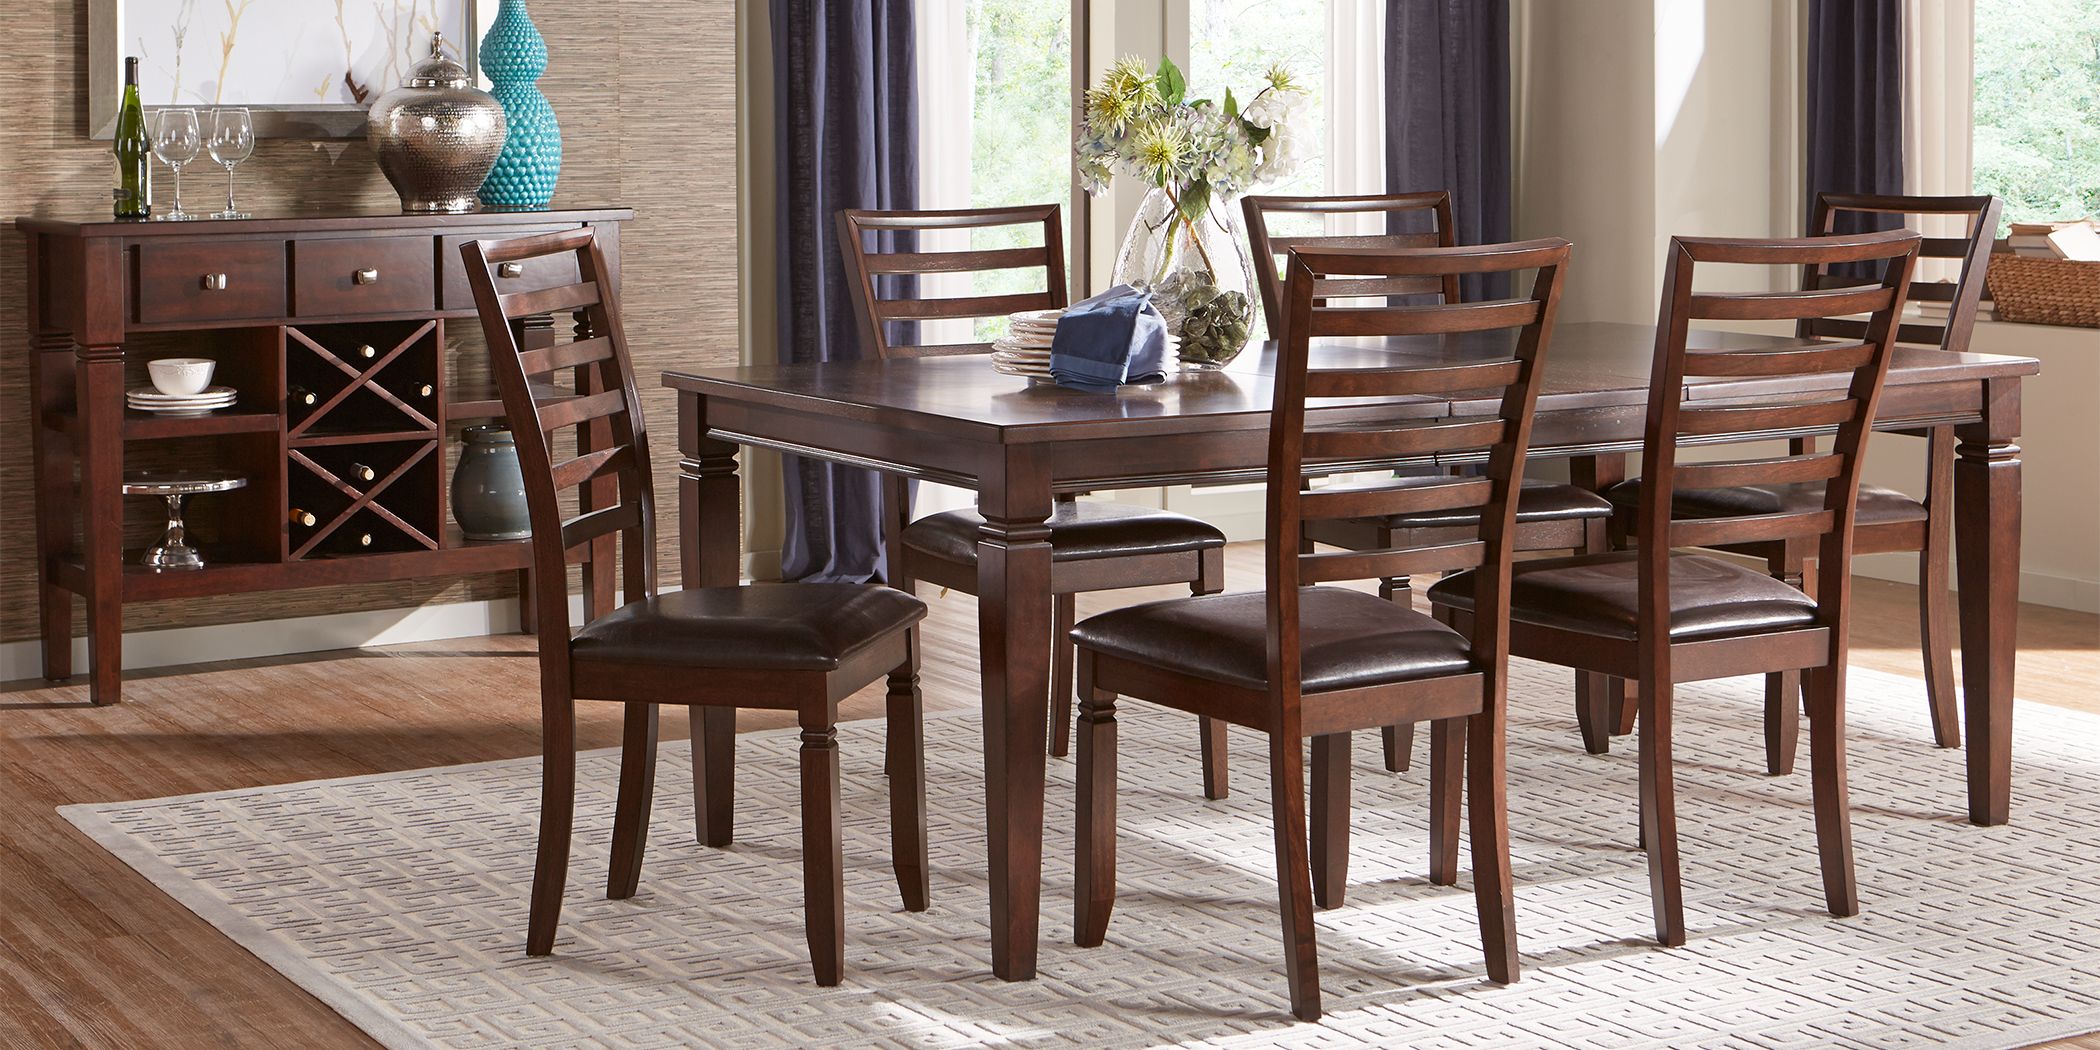 Rooms To Go Dining Room Furniture Ideas, Rooms To Go Dining Room Tables